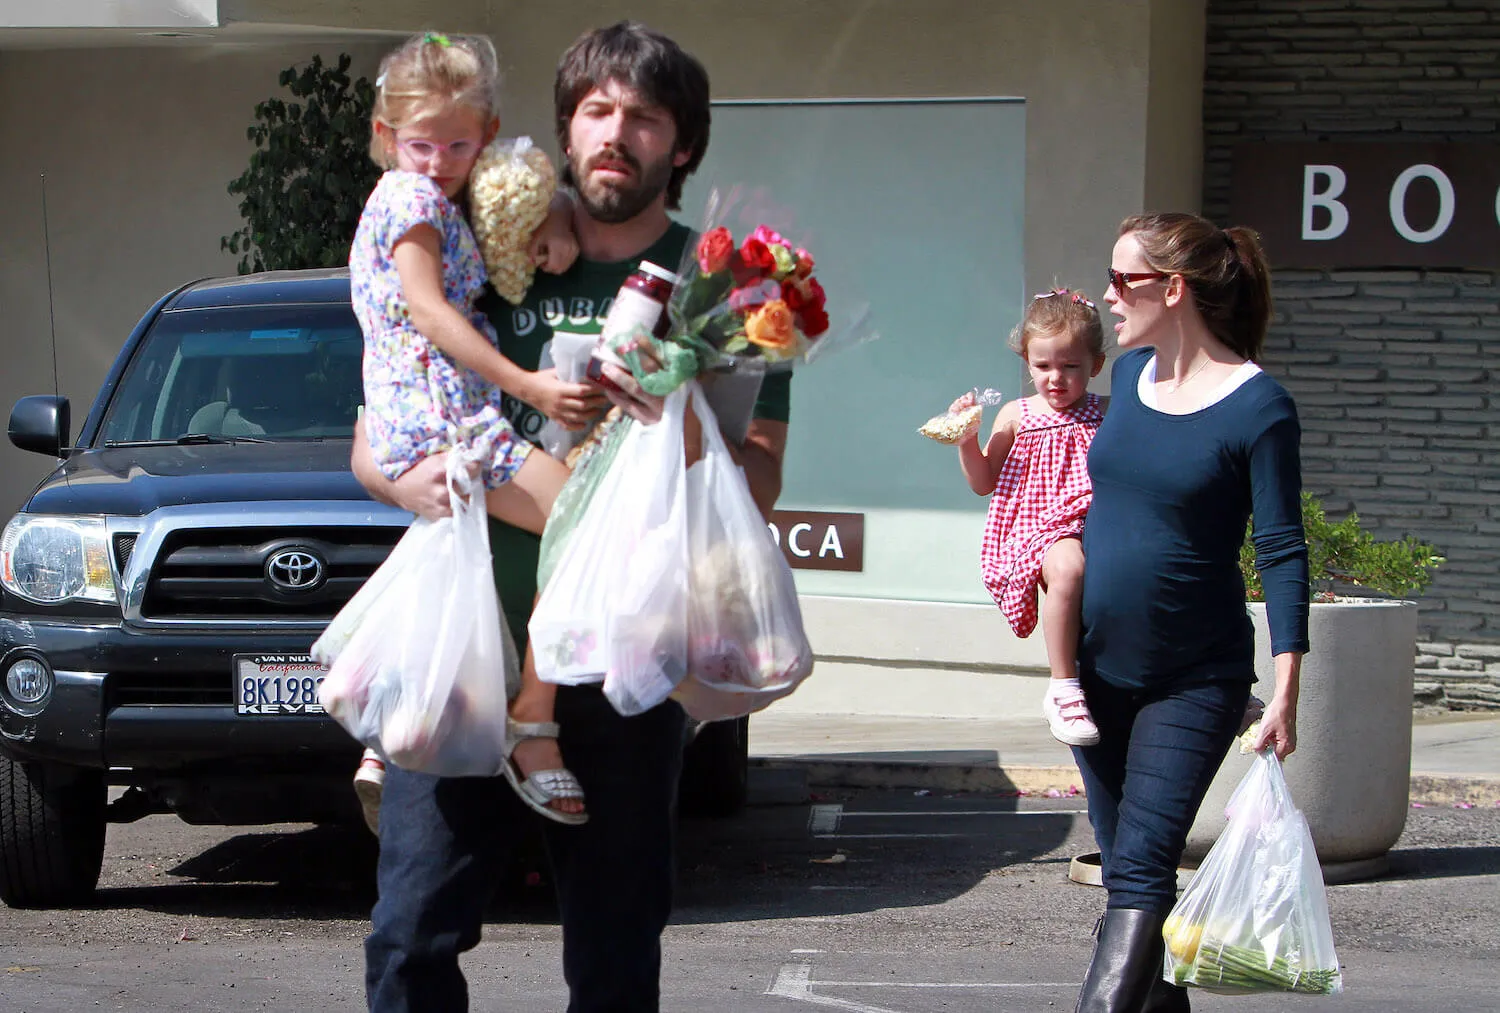 Ben Affleck carrying one of his kids and groceries from the Brentwood Farmers Market while Jennifer Garner walks behind him carrying another child on Oct. 16, 2011